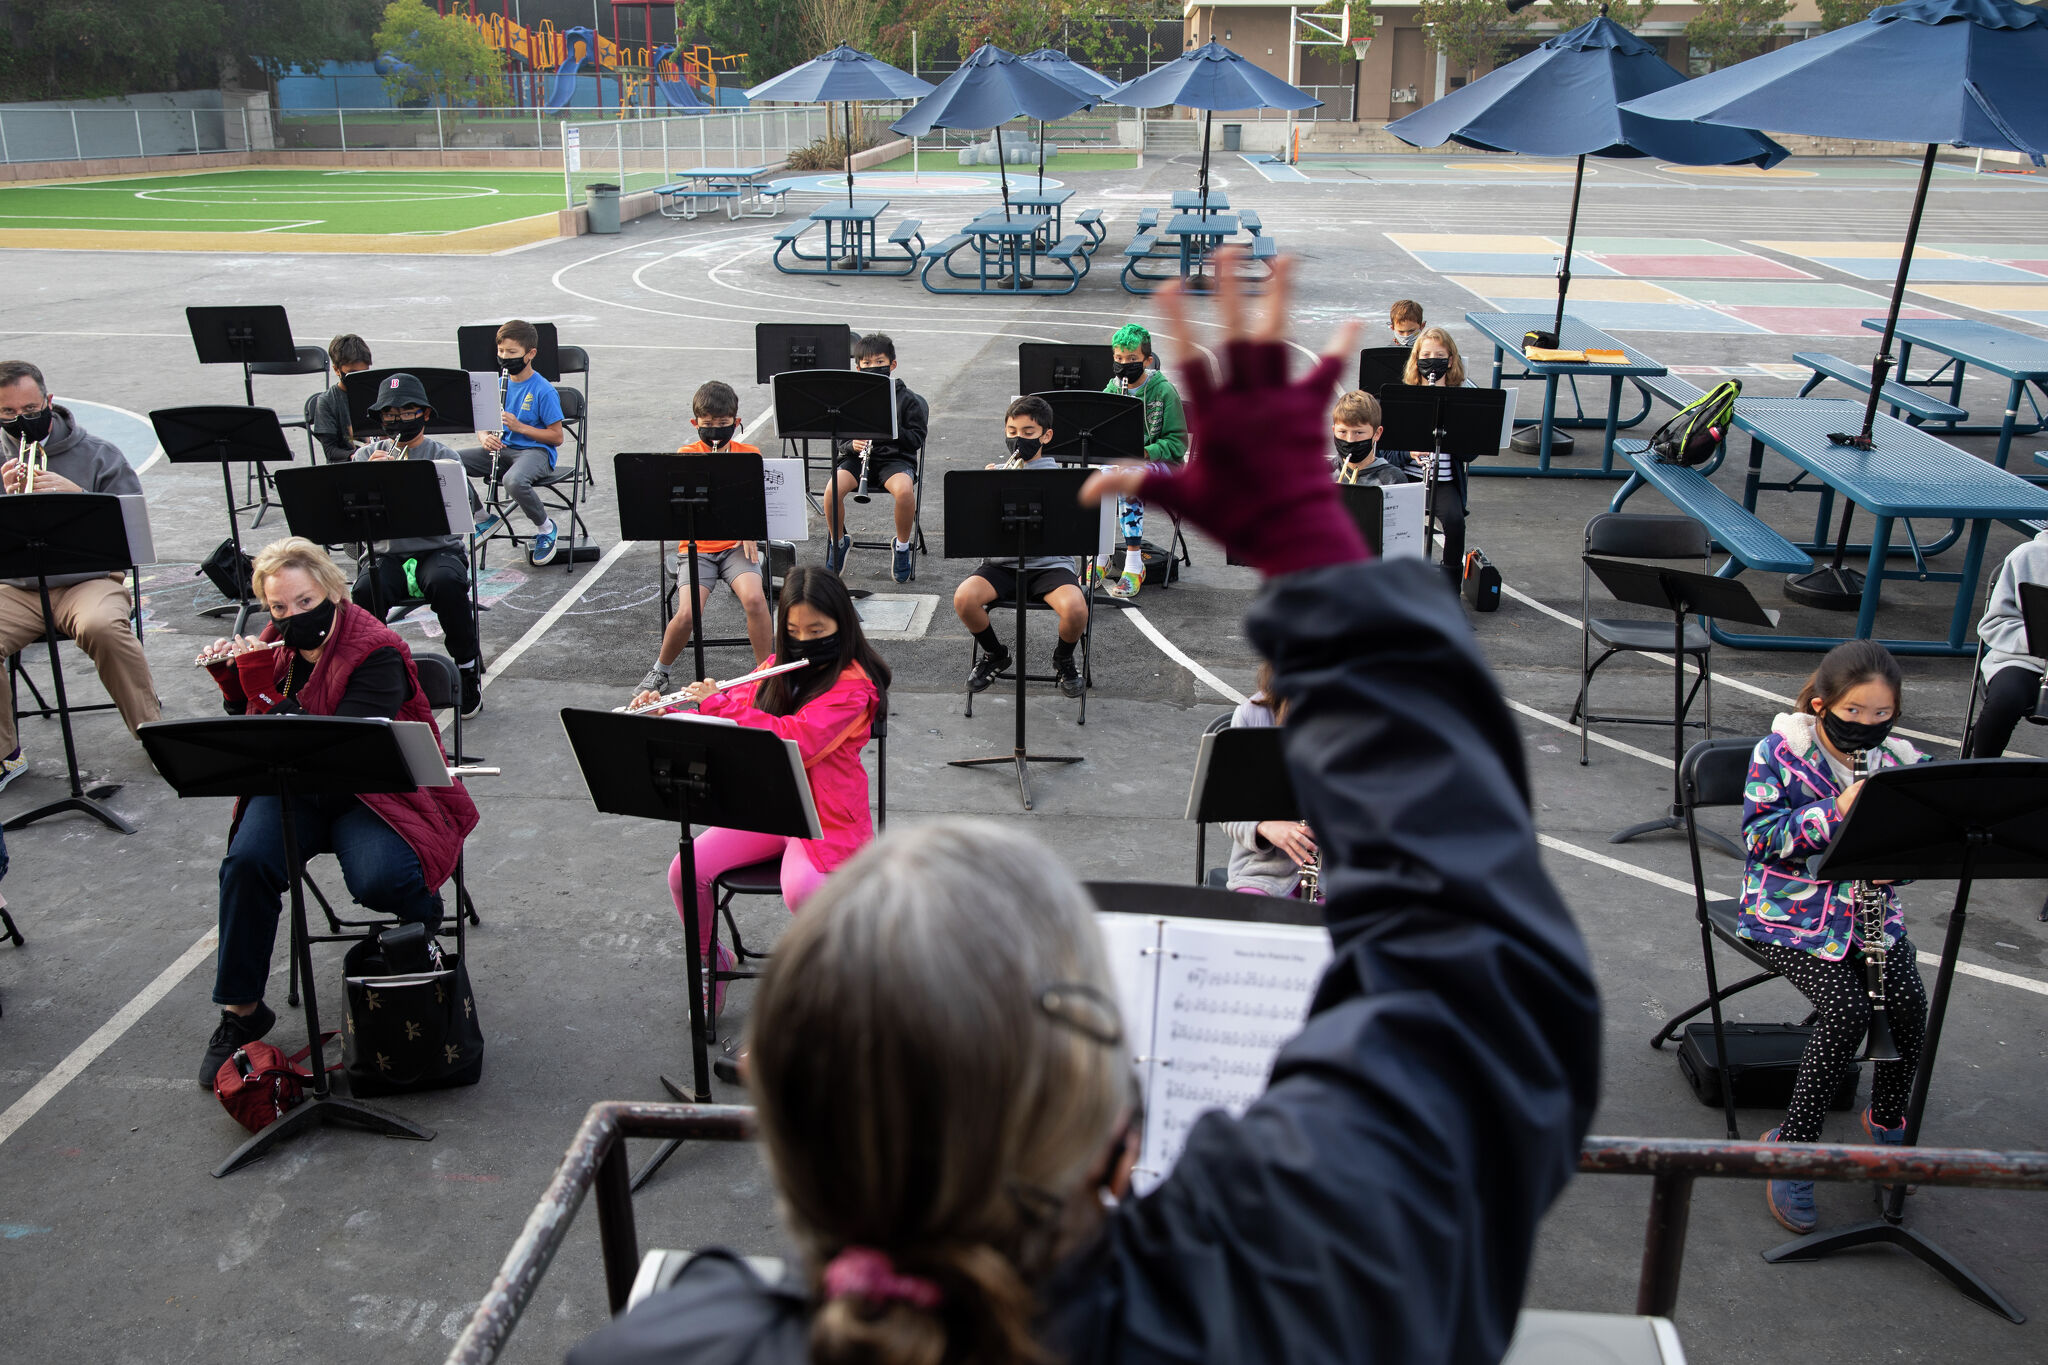 It's no mystery that arts education helps students. California voters just need to pay for it